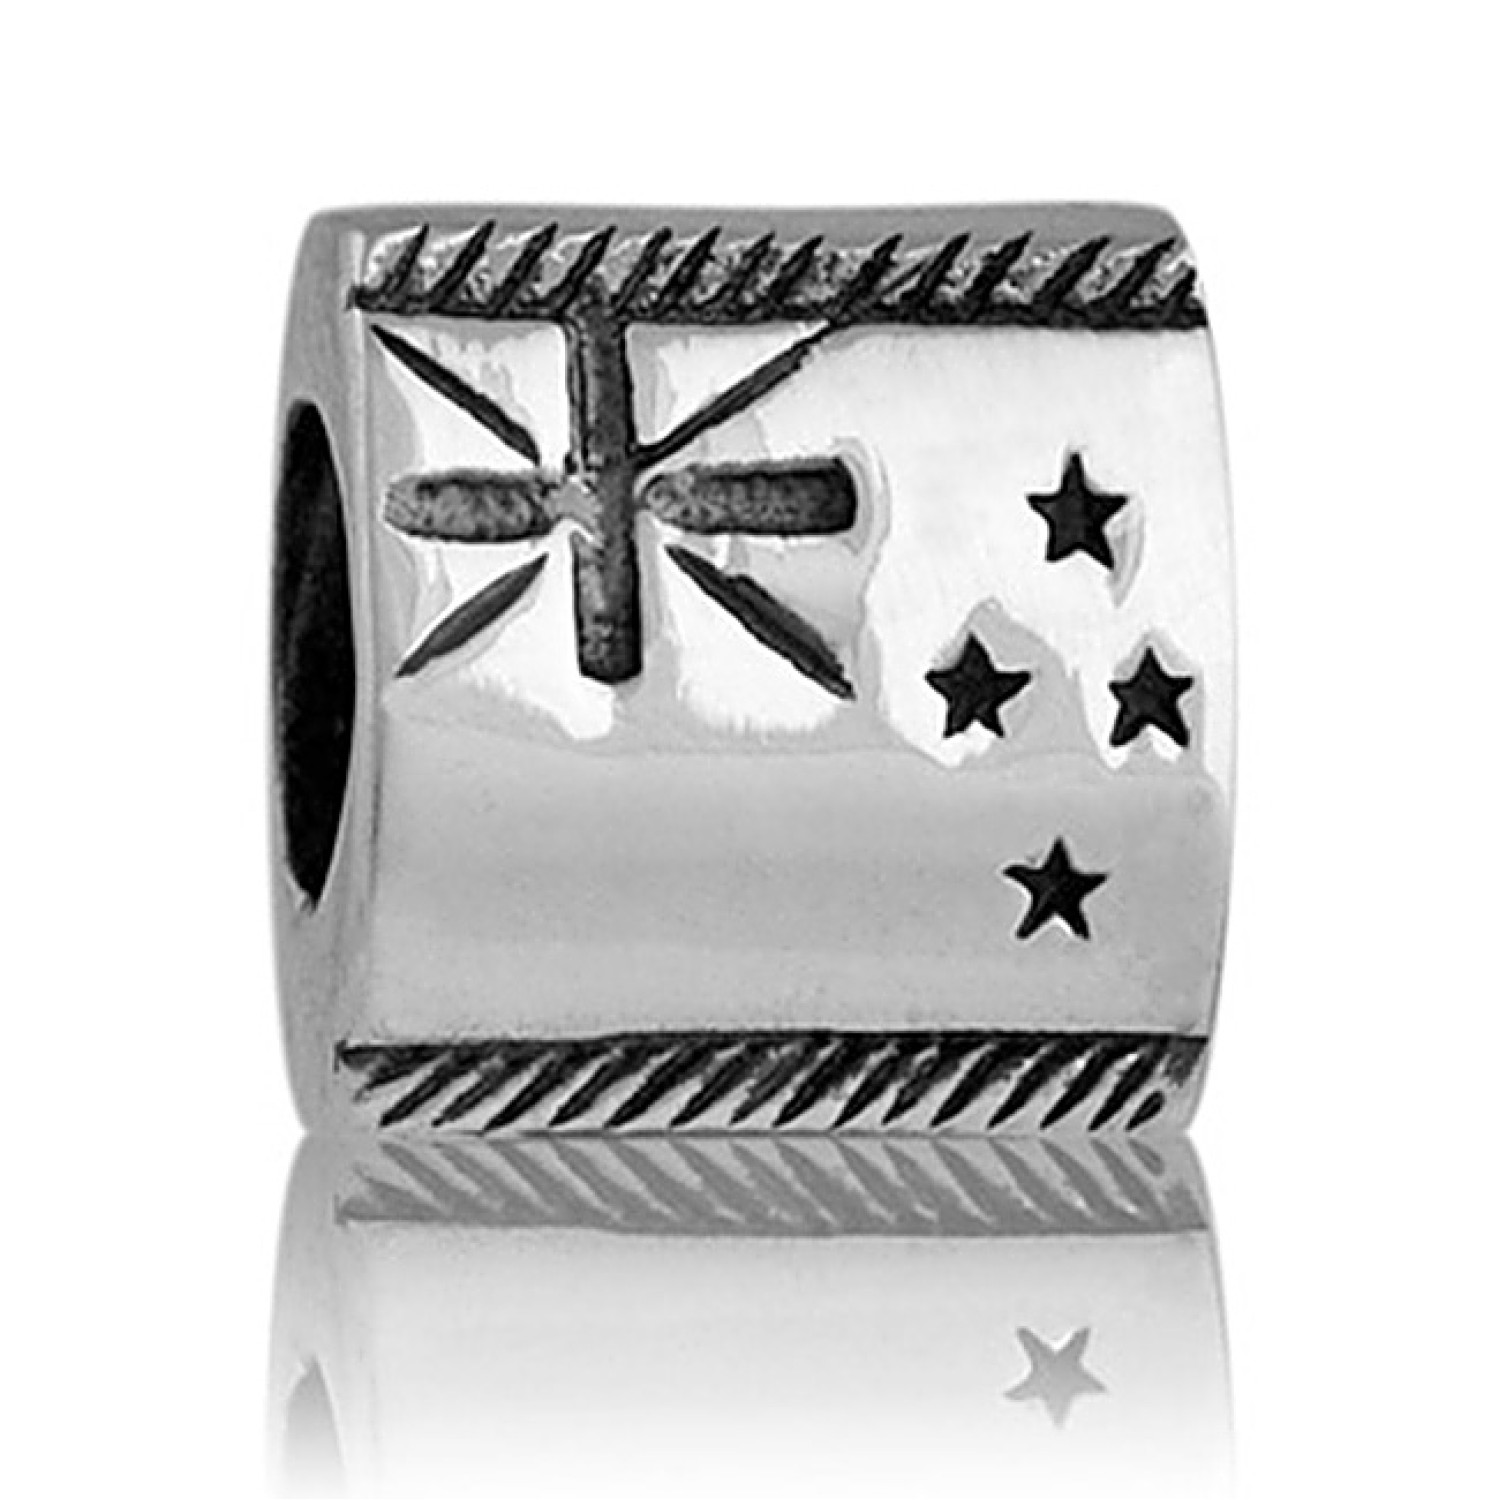 LK032 Evolves New Zealand Flag. LK032 Evolve Silver Charms New Zealand Flag When we see the New Zealand flag fly it installs a sense of pride in our country and our heritage.  The Union Jack symbolises the connection with our British ancestry. &nb @ch